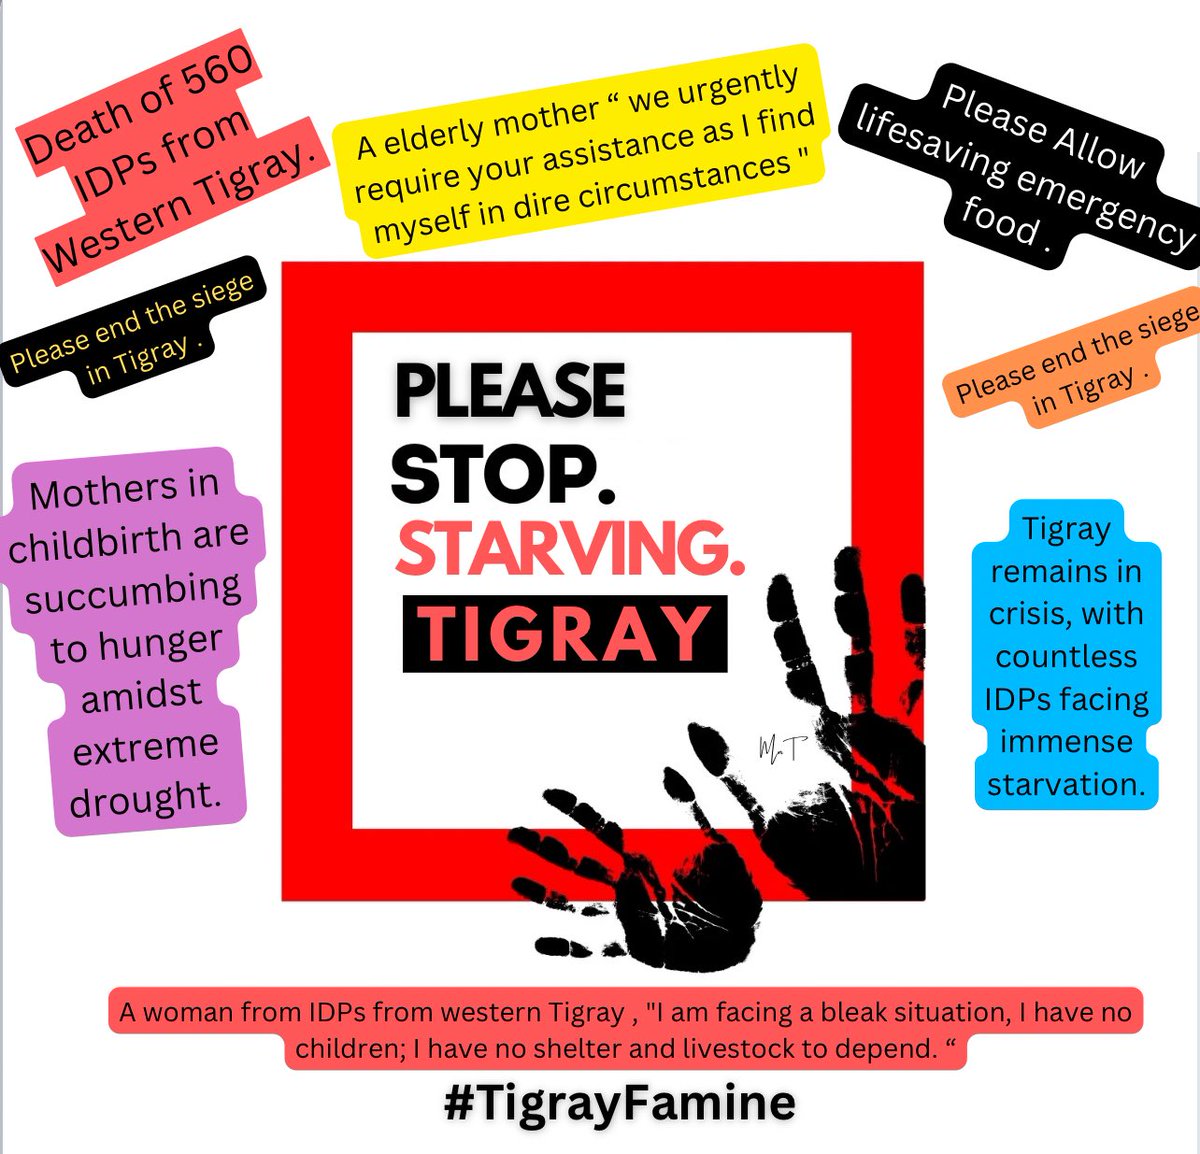 The #Tigray genocide’s aftermath, compounded by drought, demands immediate humanitarian intervention. 

#TigrayFamine #Aid4Tigray #AUSummit @EU_UNGeneva @_AfricanUnion @EUatUN @USAID @Refugees @BradSherman @USAIDSavesLives